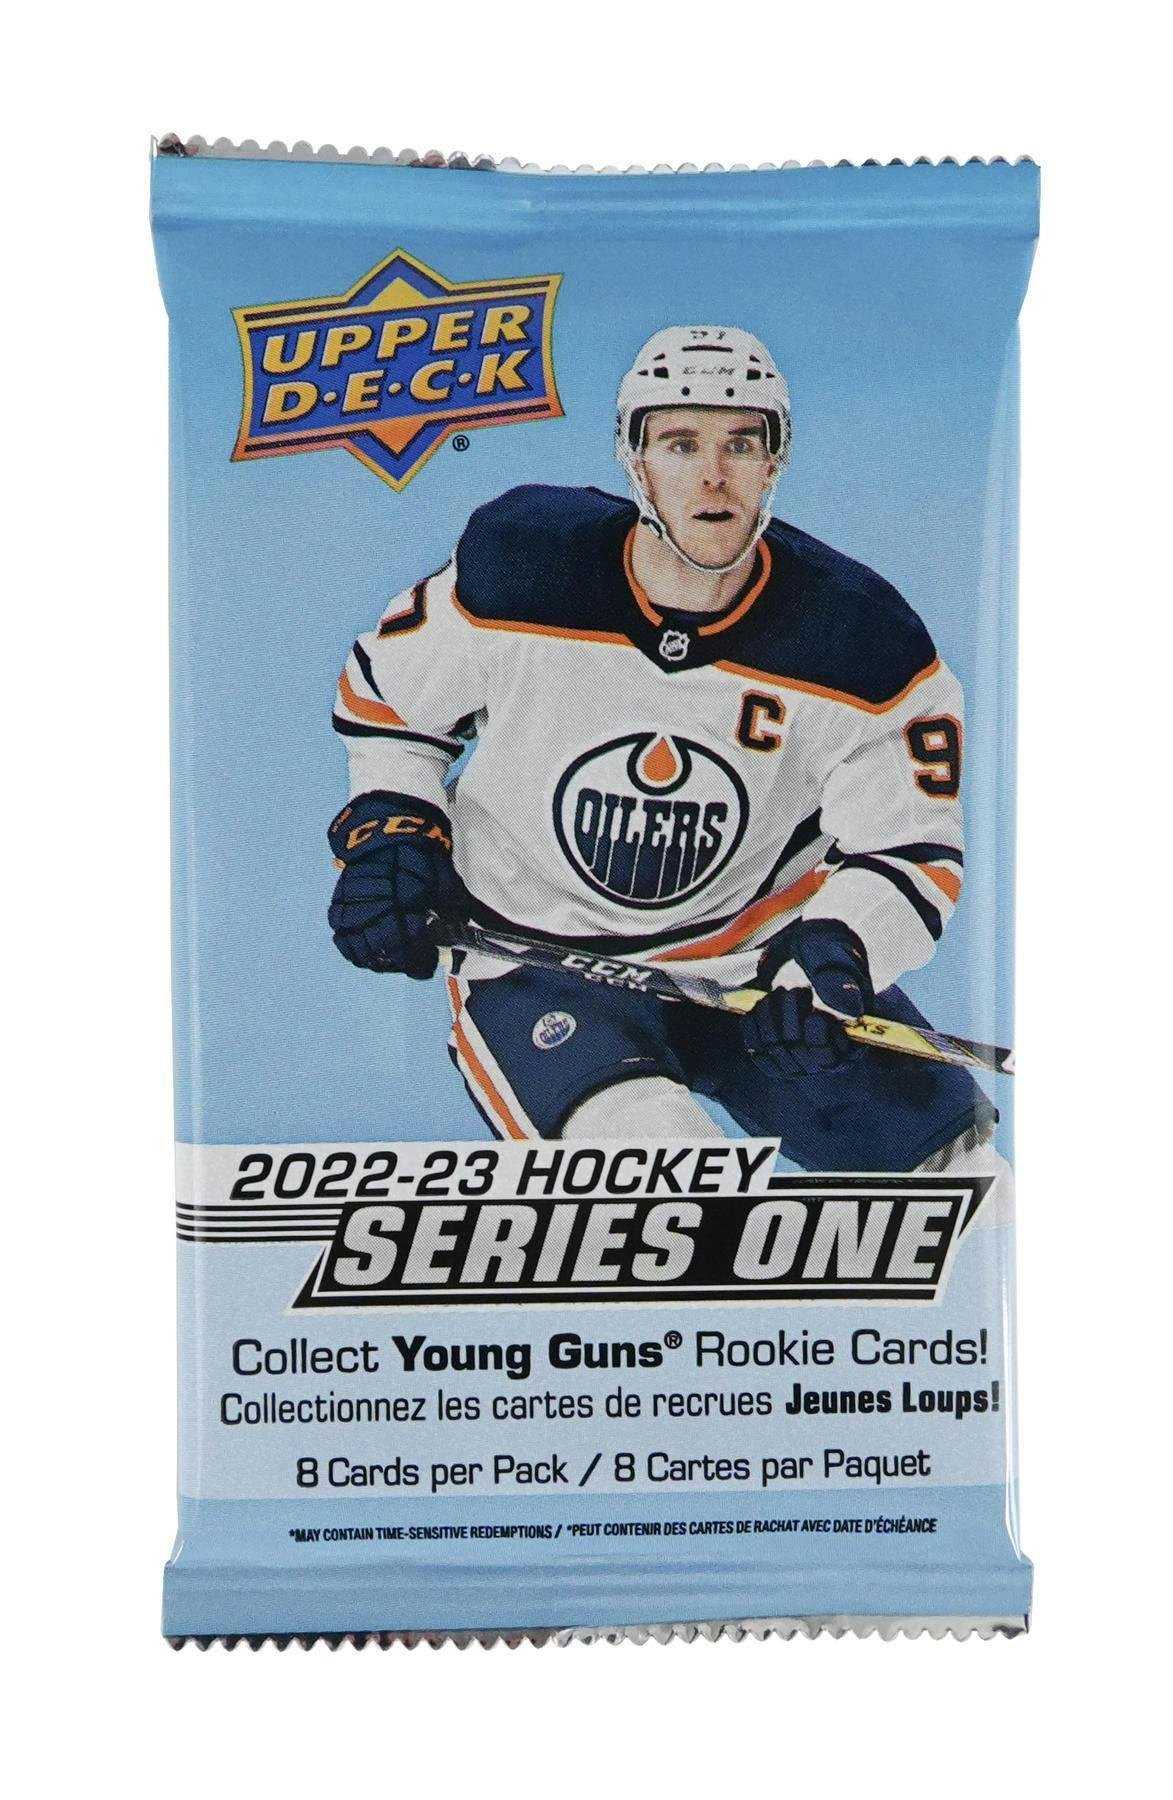 Shop Hockey Books and Collectibles